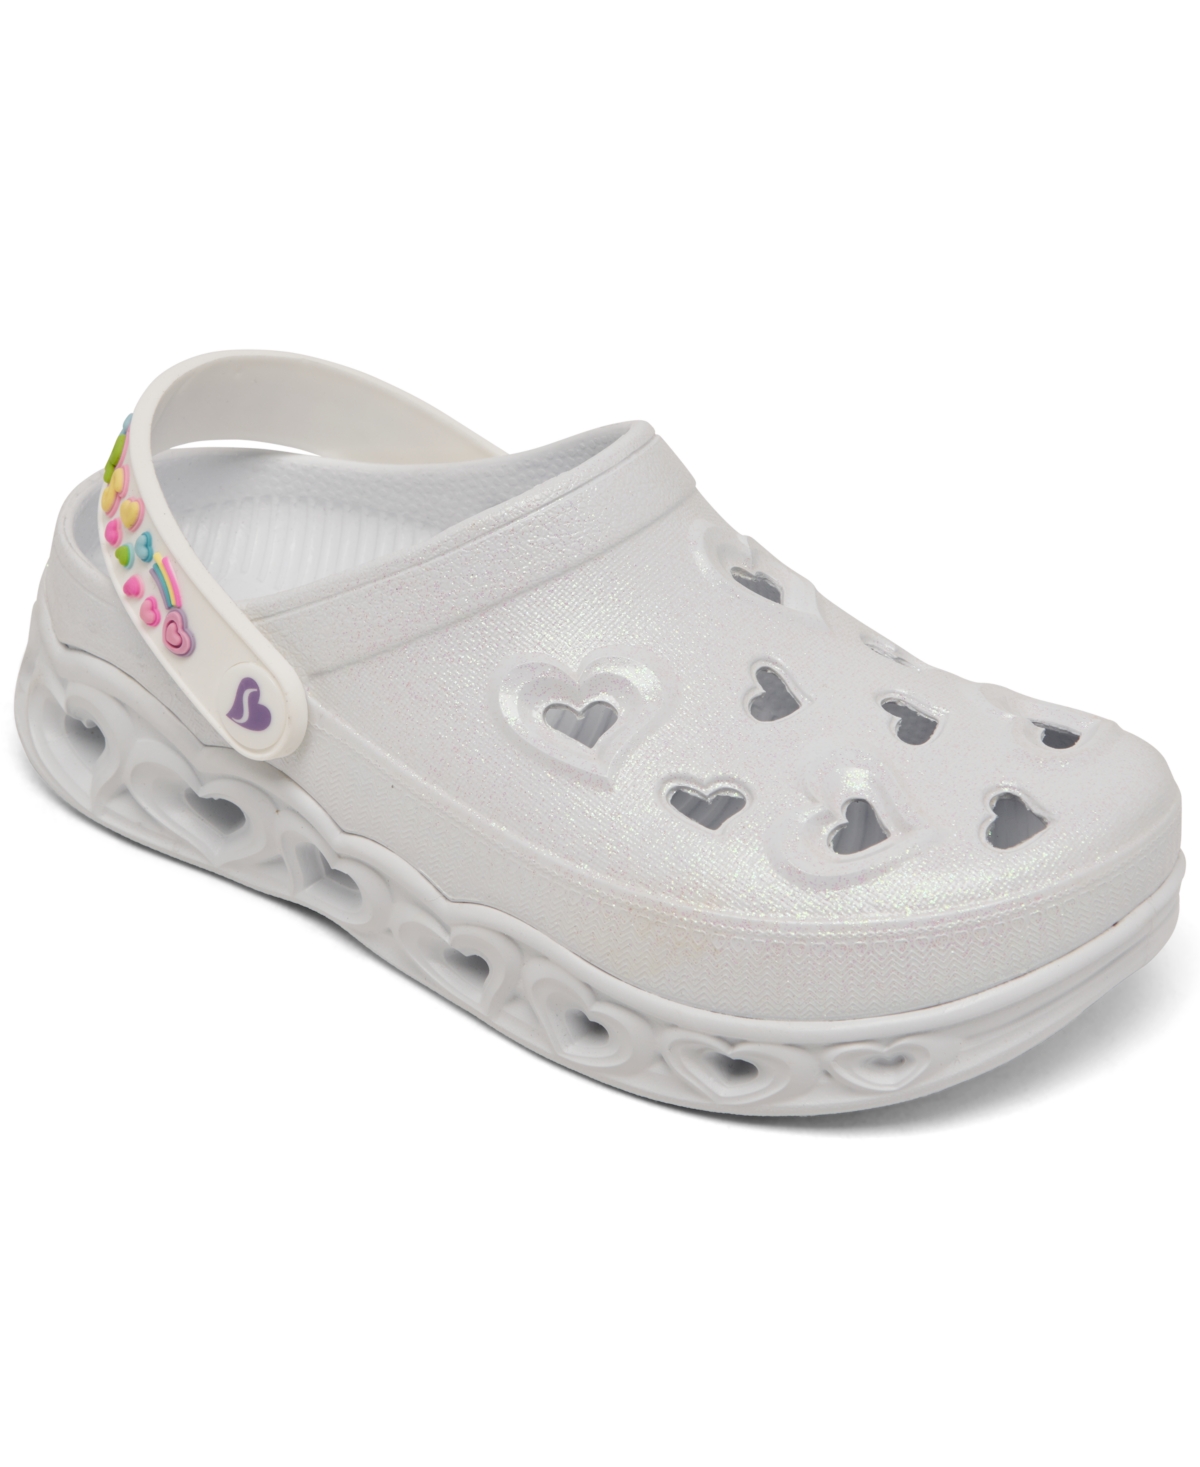 Little Girls' Foamies: Light Hearted Casual Slip-On Clog Shoes from Finish Line - Wht-white